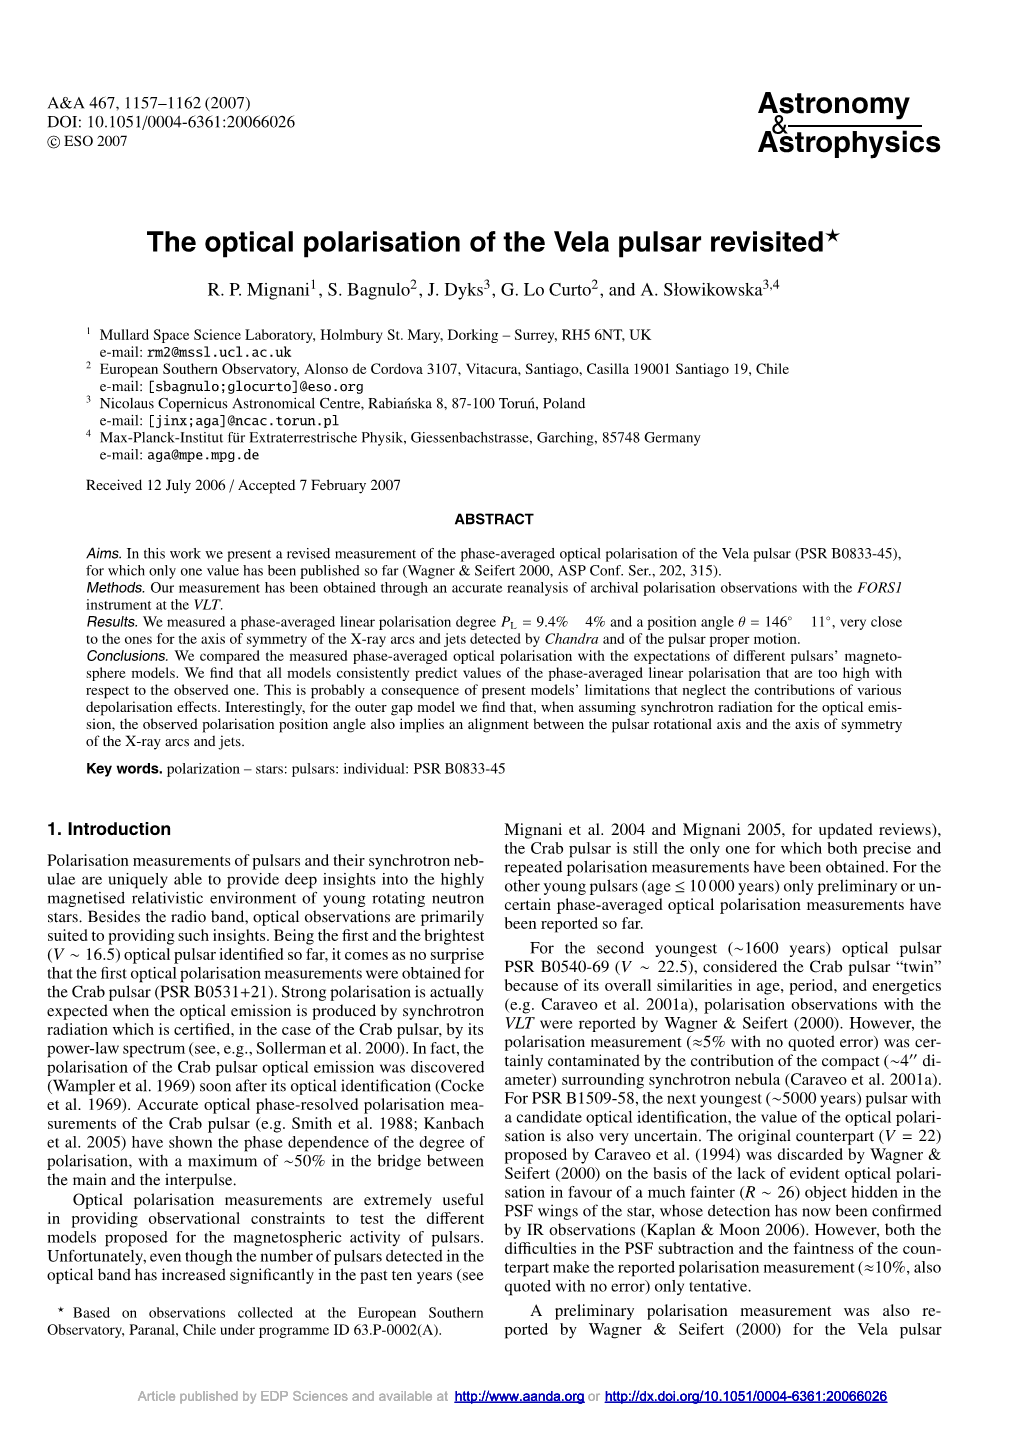 The Optical Polarisation of the Vela Pulsar Revisited